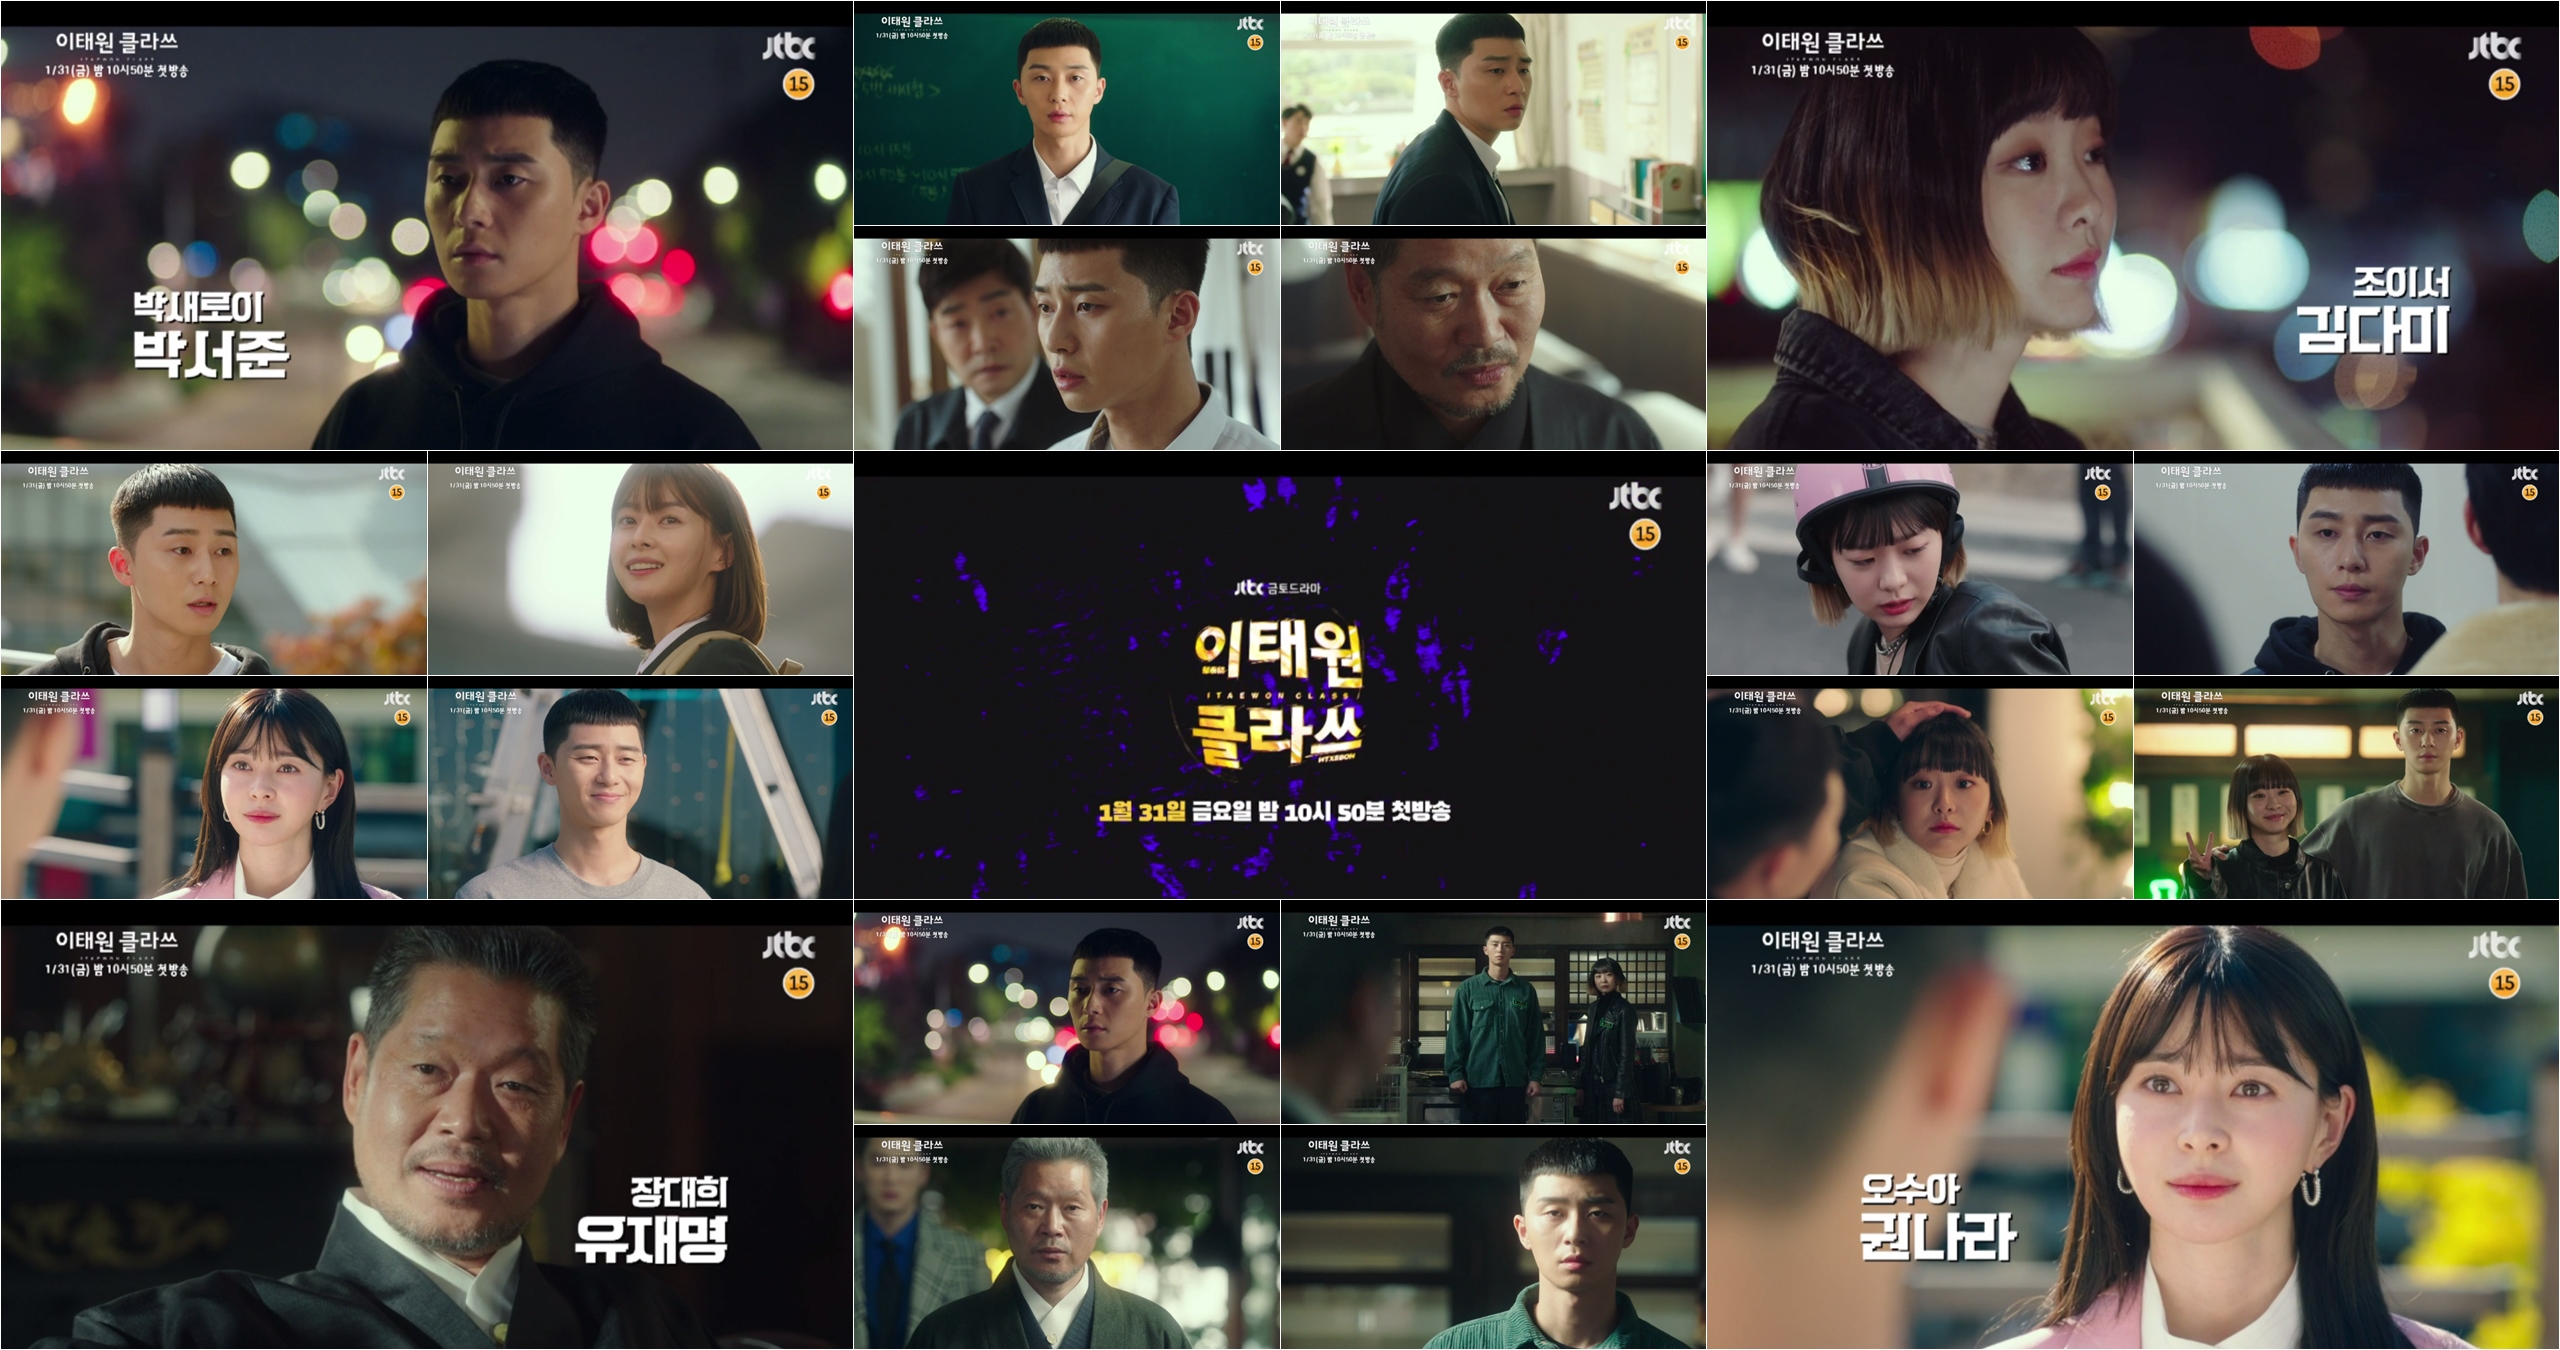 Whatever you imagine, there is more than expected Itaewon Klath.JTBCs new gilt drama Itaewon Klath (directed by Kim Seong-yoon, playwright Jo Kwang-jin, produced showbox and written, and original Web toon Itaewon Klath), which will be broadcast first on the 31st, is expected to release the preview video Itaewon Klath on the 24th, before One Week Its hot.The original story, the charming character, and the class of other actors hard-carry Hot Summer Days add to it, attract prospective viewers at once and cause indulgence.The Itaewon Clath based on the next Web toon of the same name is a work that depicts the hip rebellion of youths who are united in an unreasonable world, stubbornness and passengerhood.Their entrepreneurial myths, which pursue freedom with their own values ​​are dynamically unfolded in the small streets of Itaewon, which seems to have compressed the world.Popular original works that have secured a thick mania group, considered as Legend Life Web toon, and popular Acting Actors such as Park Seo-joon, Kim Da-mi, Yoo Jae-myung, and Kwon Nara are attracting attention as the best anticipated works in 2020.The highlight video released on this day attracts those who see it as an inextricable attraction.From the first day of transfer, the unusual Xiao Xinnam Park Seo-joon Park is intertwined with a link between Jangga and tough bad love.The first time I met President Jang Dae-hee (Yoo Jae-myung) because I could not stand the atrocities of Jang Geun-won (Ahn Bo-hyun), the successor of Jangga.The new Changs force, which changes even the flow of air, conveys the extraordinaryness of Roys choice of his Xiao Xin without hesitation. His life begins to change after that day.Xiao Xin, the word that things that do not have are used to keep their pride.In the voice of the chairman, If there is no gain, it is stubborn and it is only a guest, and the voice of mockery, I will give you a good look, Roys strong eyes amplify the tension in the two peoples battle.The appearance of Changs day, which felt Danger in a reunion with Park, who later counterattacked the stage of Sanbam, also provokes interest.Three young people, including Roy, Joy (Kim Da-mi Boone), and SuA (Kwon Nara Boone), are curious by their subtle triangles.SuA, who returned to the rival Jangga in his first love that gave him a thrill during his school days.Park also faces her again, making a plan like a pledge to enter Itaewon seven years later, while Park and Joyce foretell an extraordinary first meeting.The voice of Joy, who has saved himself every moment of Danger, is very strong and vigorous, saying that he will risk his life to salmon and Roy.Joy, who will be unfolding with Roy, and SuAs tight nerves also raise expectations, and the synergy of the youthful sweet members is also essential.Attention is drawn to the stories of young people who will accept Itaewon, including Jang Geun-soo (Kim Dong-hee), former gangster Choi Seung-kwon (Ryu Kyung-soo), and Ma Hyun-yi (Lee Joo-young), the mystery chef of Danbam.The reaction of viewers is also hot.As soon as the video is released, various portal sites and SNS are wondering how it will be different from the original, Park Seo-joon Table Roy is so expected, Every character seems to be full of personality, Yoo Jae-myung charismatic hoodall, I wonder about the story of the new Roy and SuA, Kim Da-mi, Is it so cute? Park Seo-joon, wait! The Actors union seems to be novel to the past, The synergy is not unusual, The perfect lineup without an Acting hole, The other Itaewon Clath, and The first one Week still left?On the other hand, Itaewon Clath is the first production drama of Showbox that has shown films with workability and popularity such as Taxi Driver, Assassination and Tunnel.Director Kim Seong-yoon, who has been recognized for his sensual performance through Gurmi Green Moonlight and Discovery of Love, holds a megaphone and the original author Jo Kwang-jin takes charge of writing the script directly and gathers expectations.It will be broadcast first on JTBC at 10:50 pm on the 31st (Friday).iMBC  JTBC Screen Capture